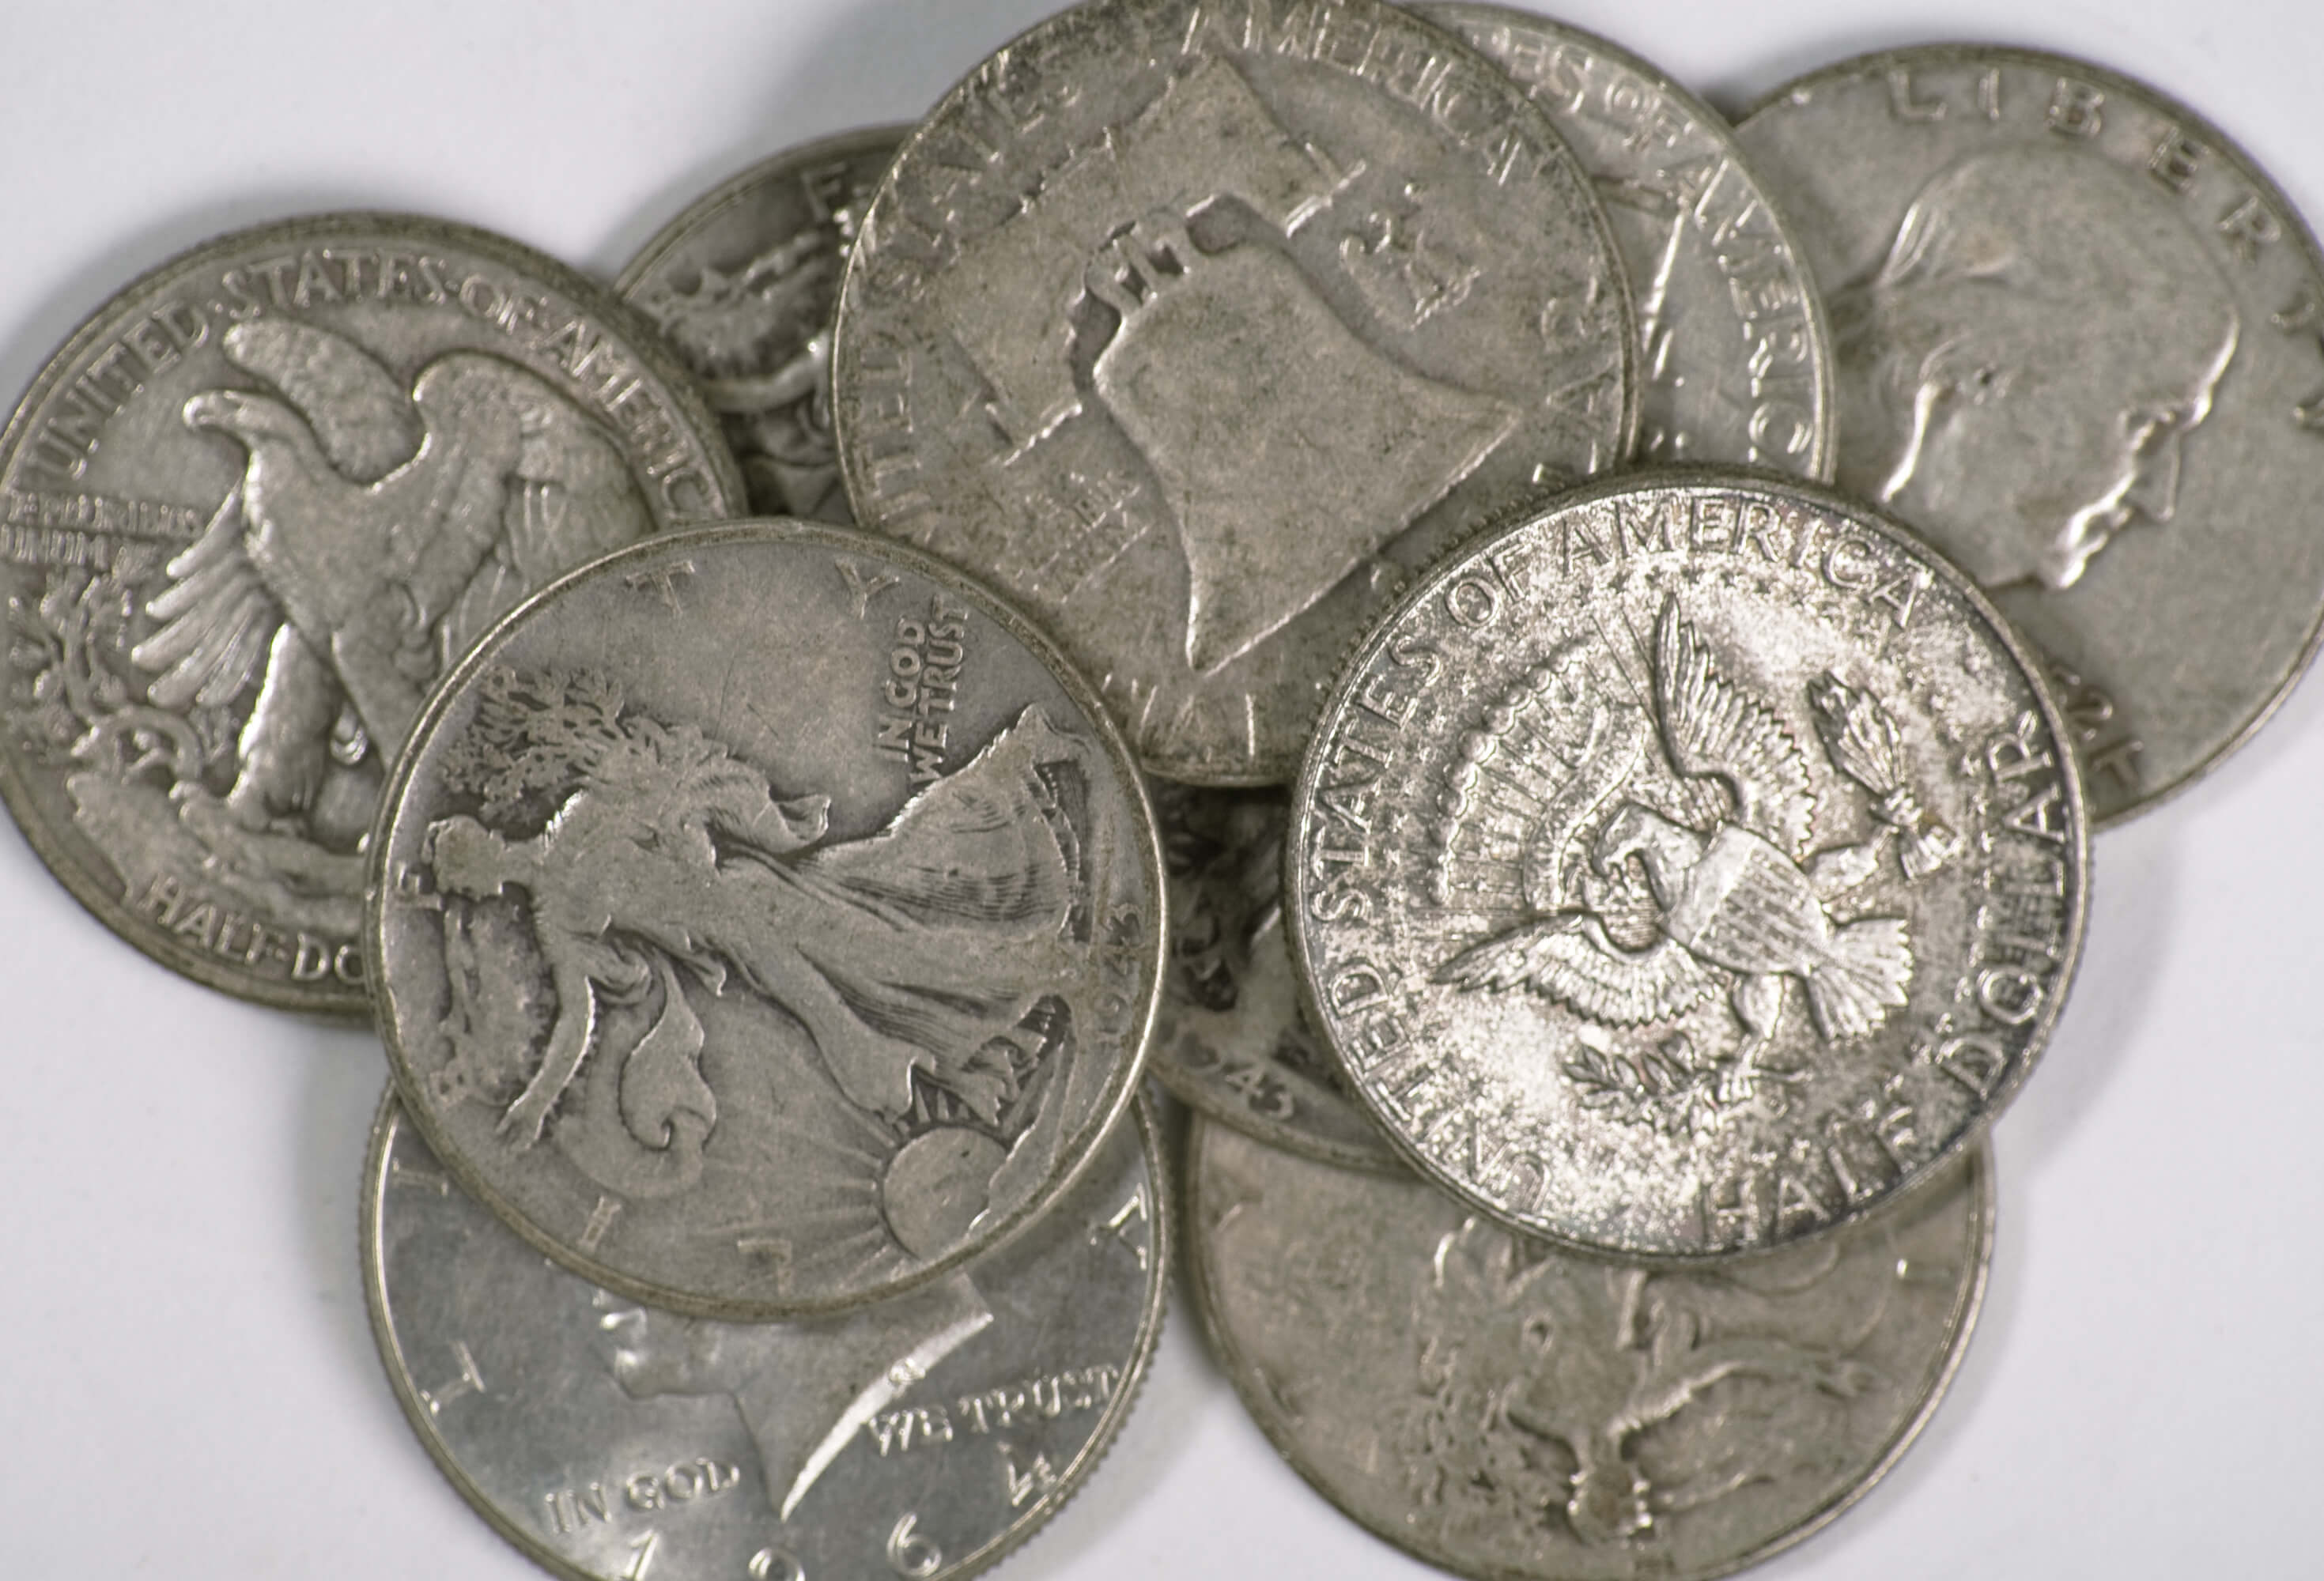 Junk Silver Faqs Must Know Facts About 90 Silver Coins,Cake Glaze